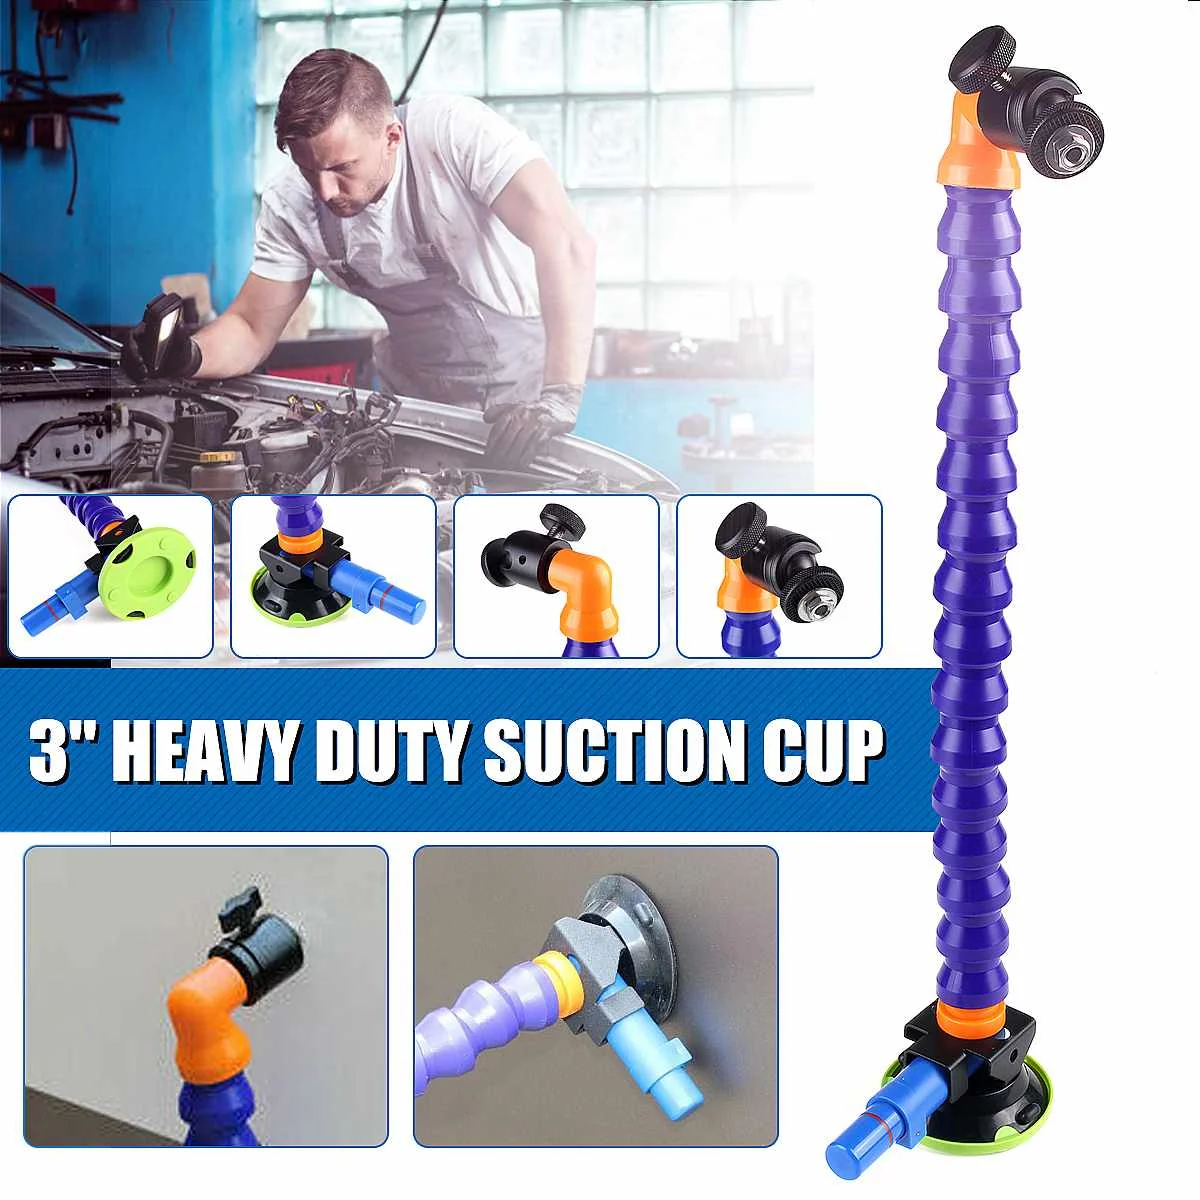 

Heavy Duty Hand Pump Suction Cup 3 inch with Flexible Gooseneck Pipe 360 Degree Tripod Head for Dent Repair LED Lamp Holder